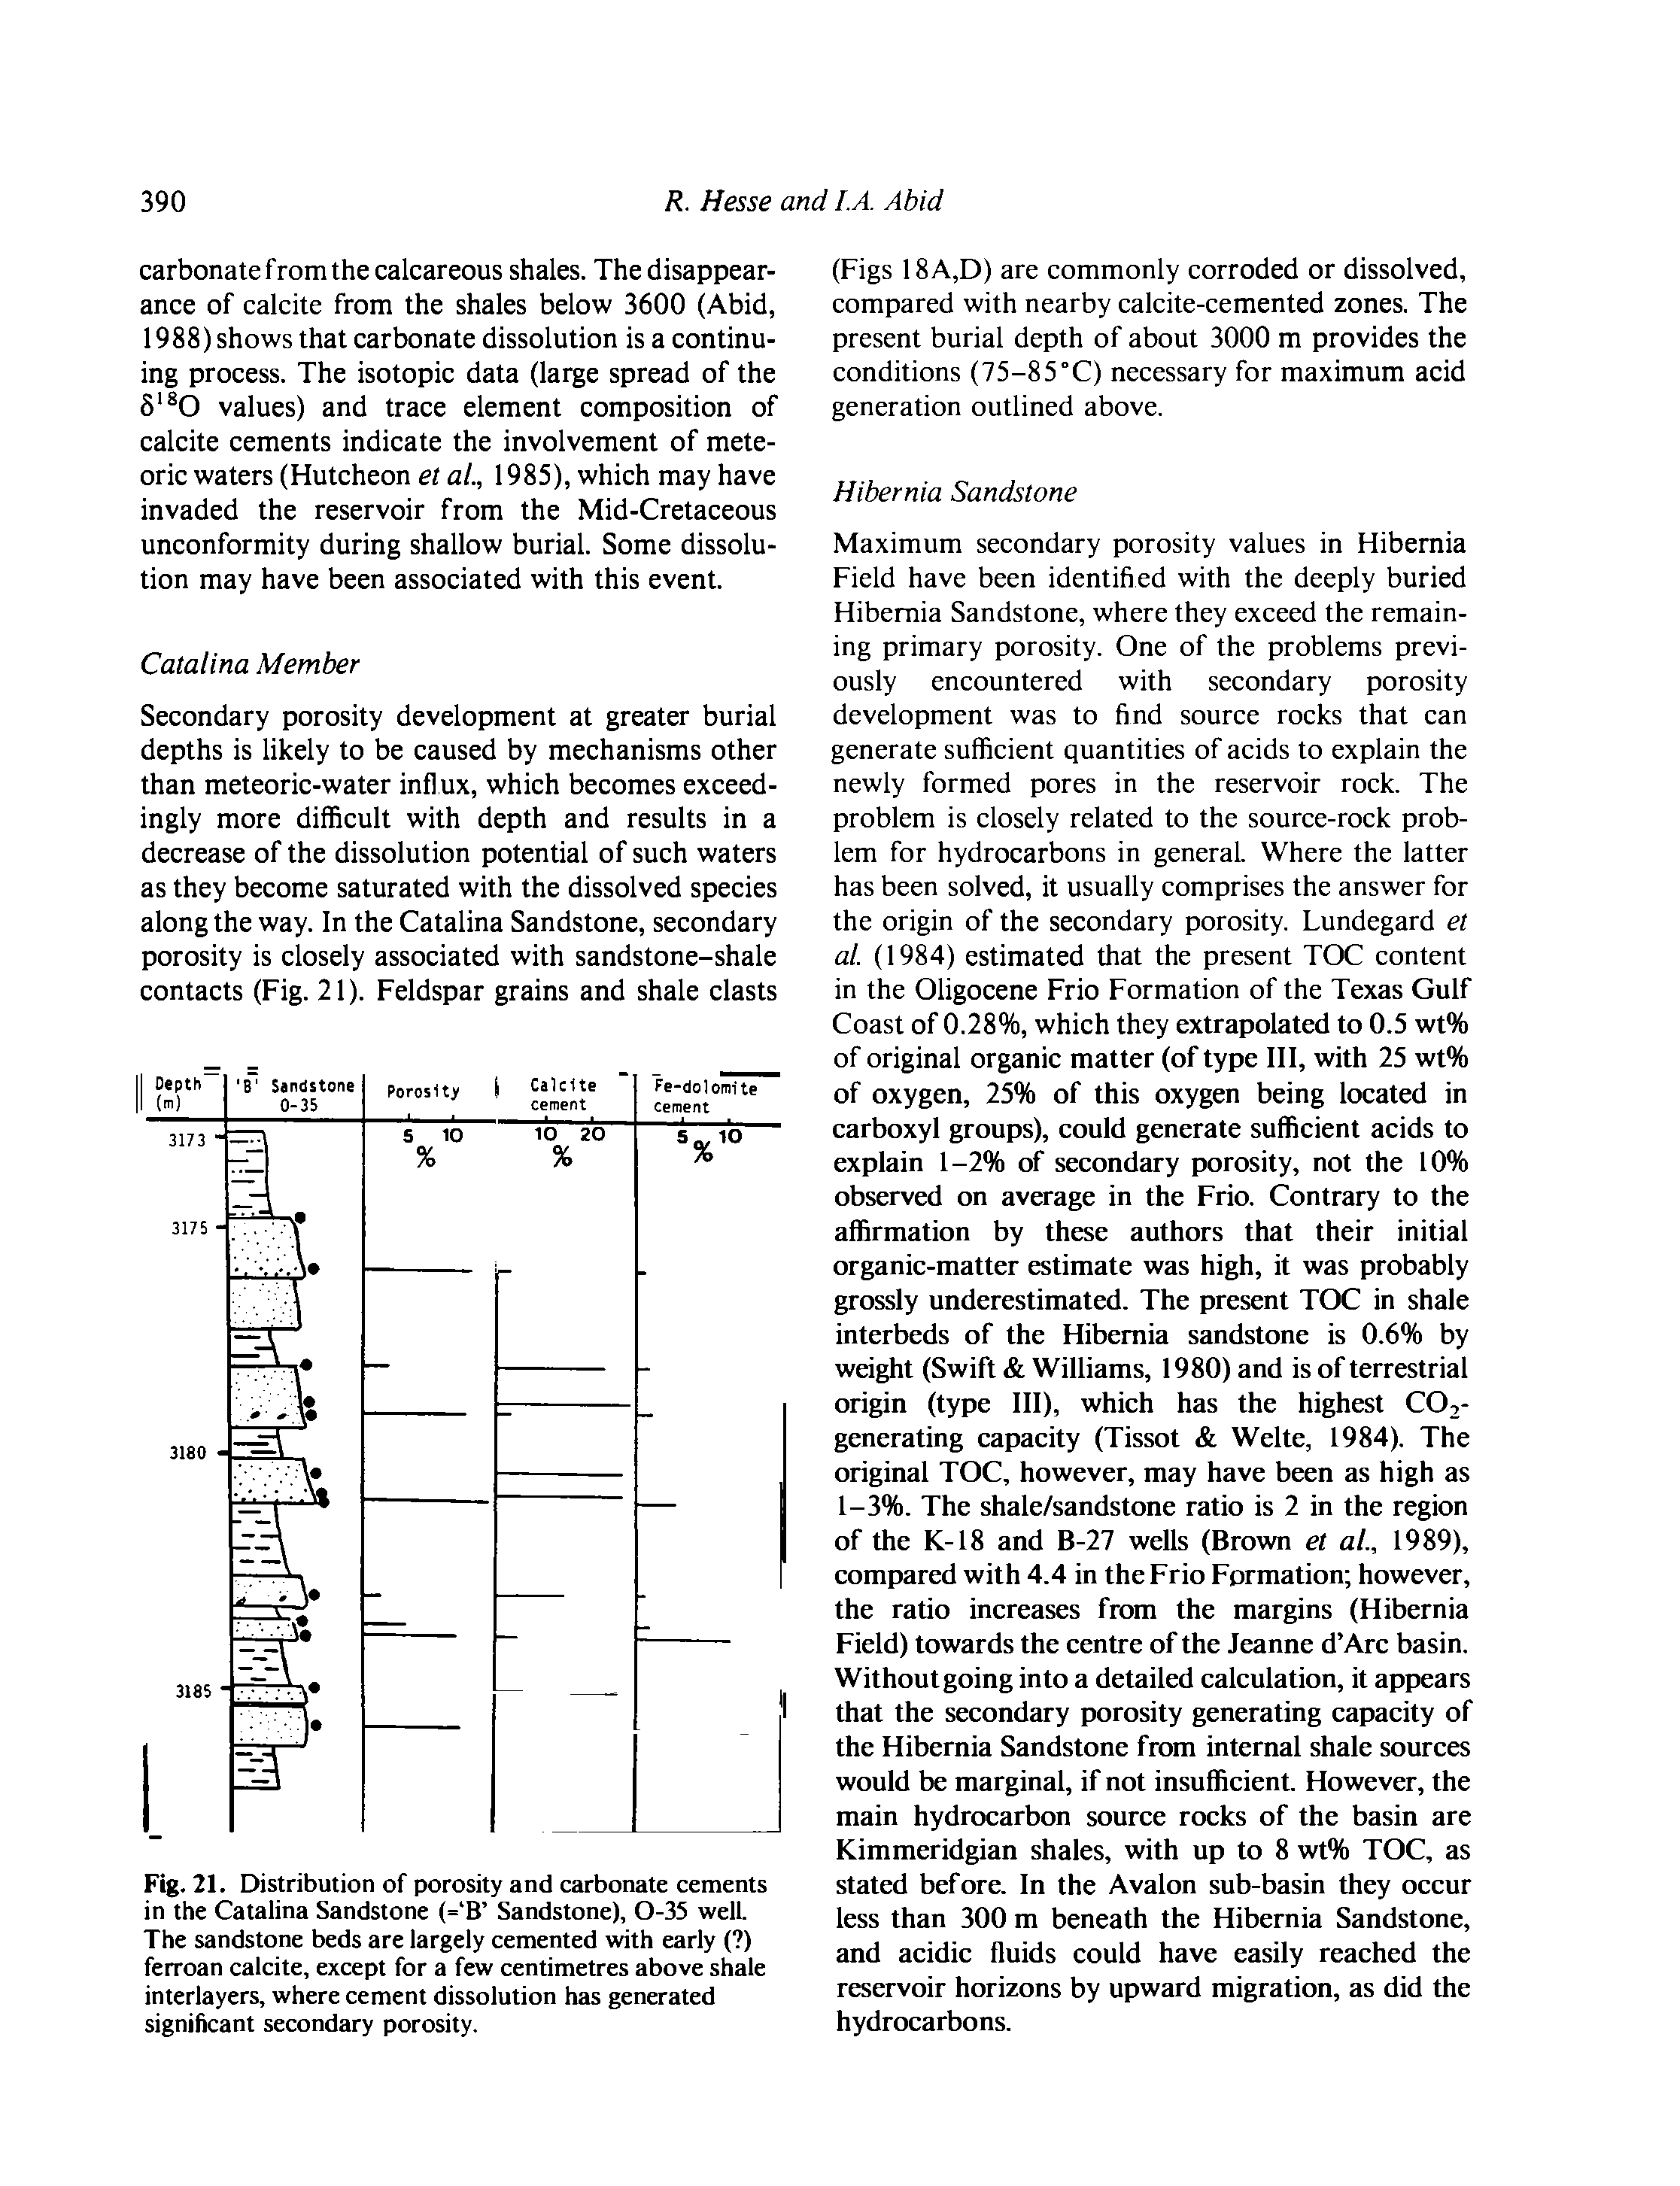 Fig. 21. Distribution of porosity and carbonate cements in the Catalina Sandstone (= B Sandstone), 0-35 well. The sandstone beds are largely cemented with early ( ) ferroan calcite, except for a few centimetres above shale interlayers, where cement dissolution has generated significant secondary porosity.